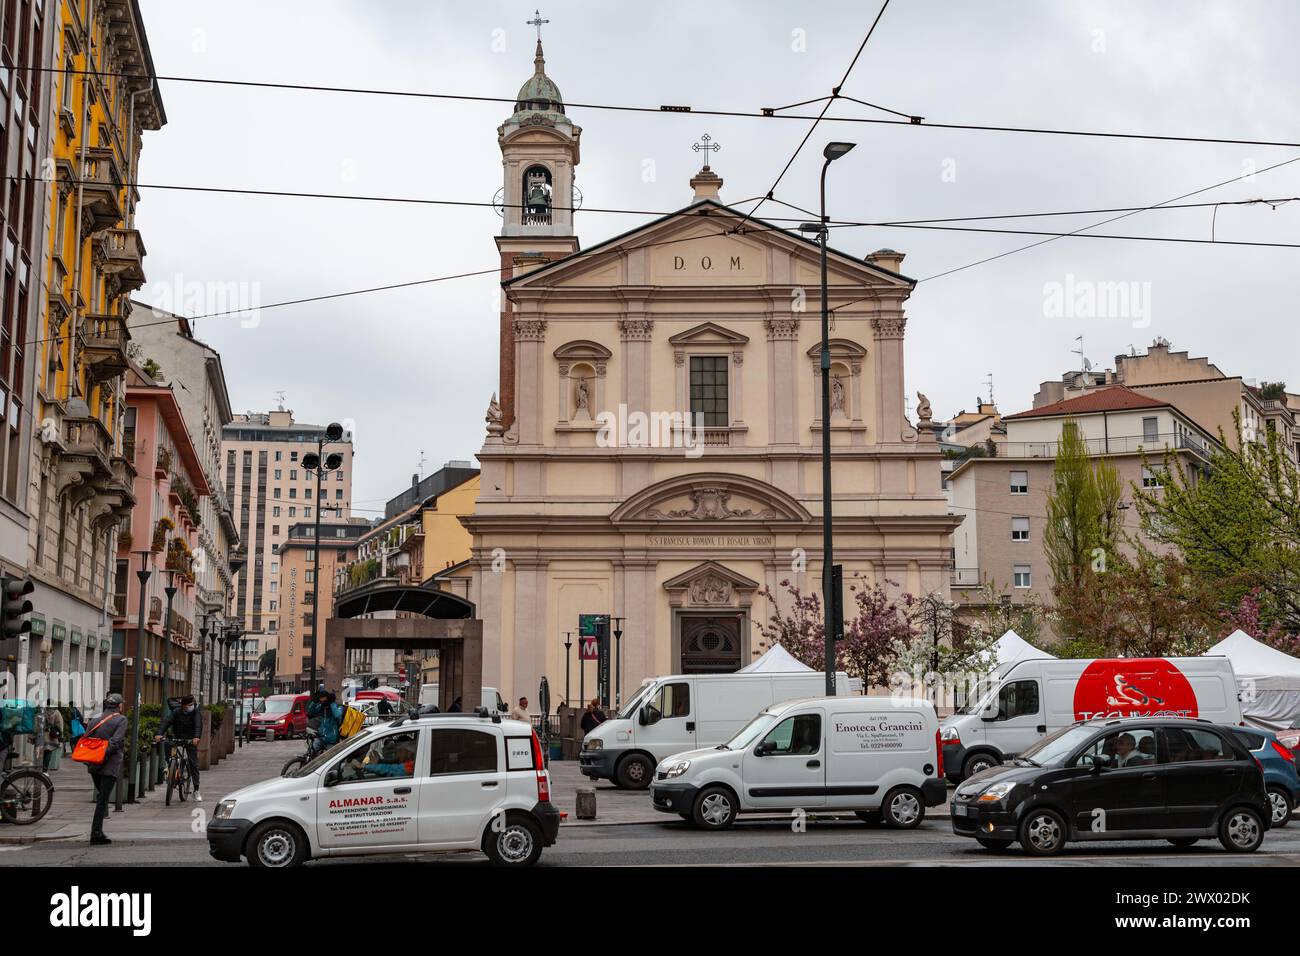 Milan, Italy - 30 March 2022: The church of Santa Francesca Romana in Milan, located in the square of the same name, near Corso Buenos Aires, Porta Ve Stock Photo